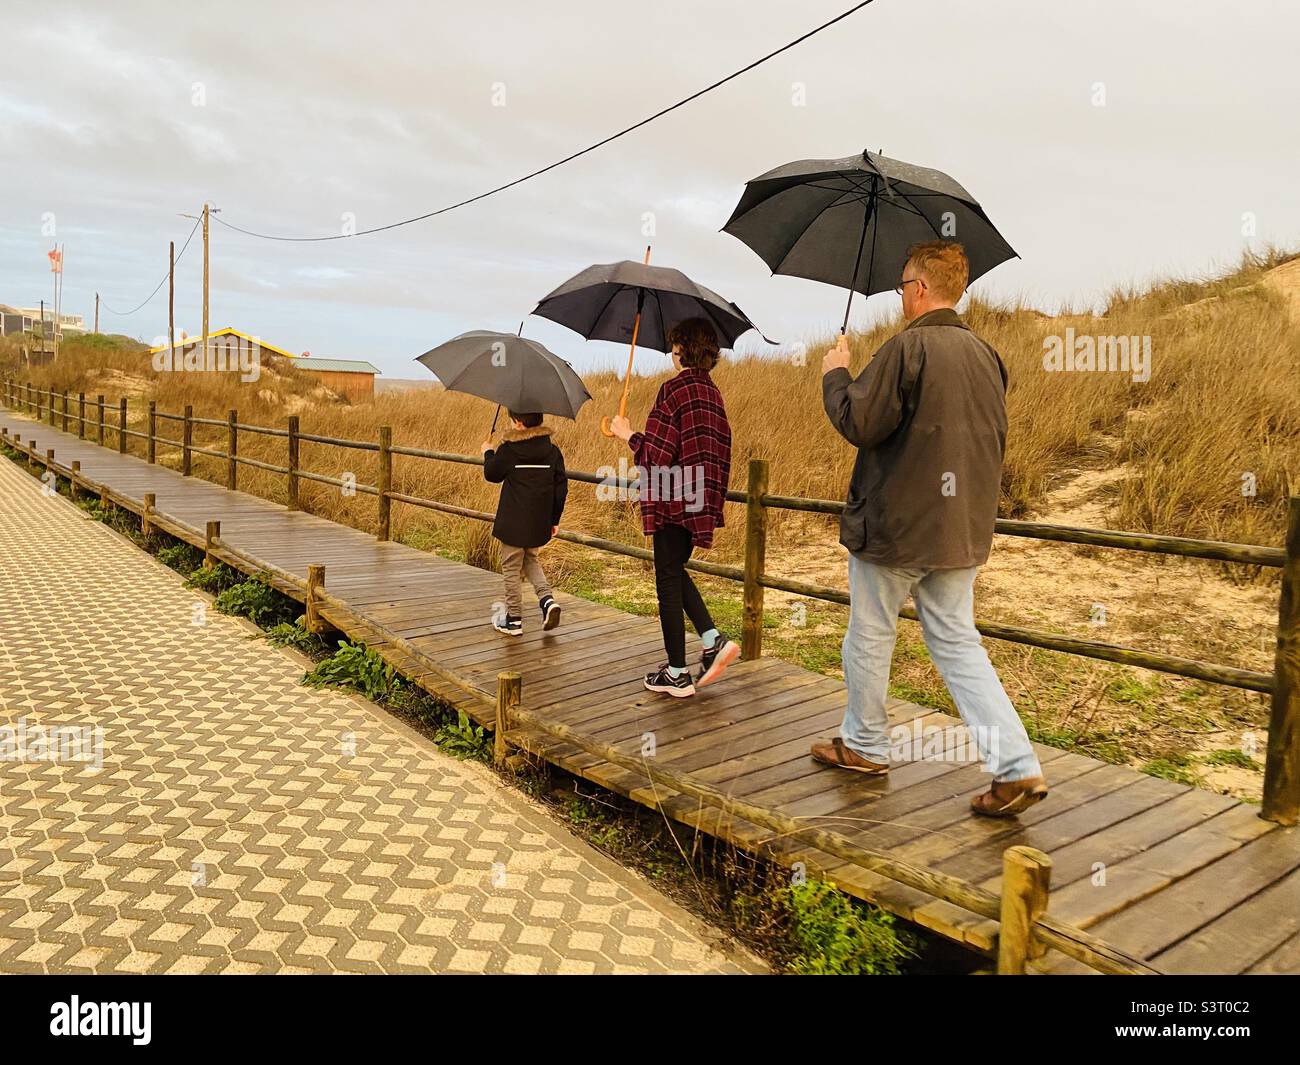 Family walking along a boardwalk in the rain all with umbrellas Stock Photo